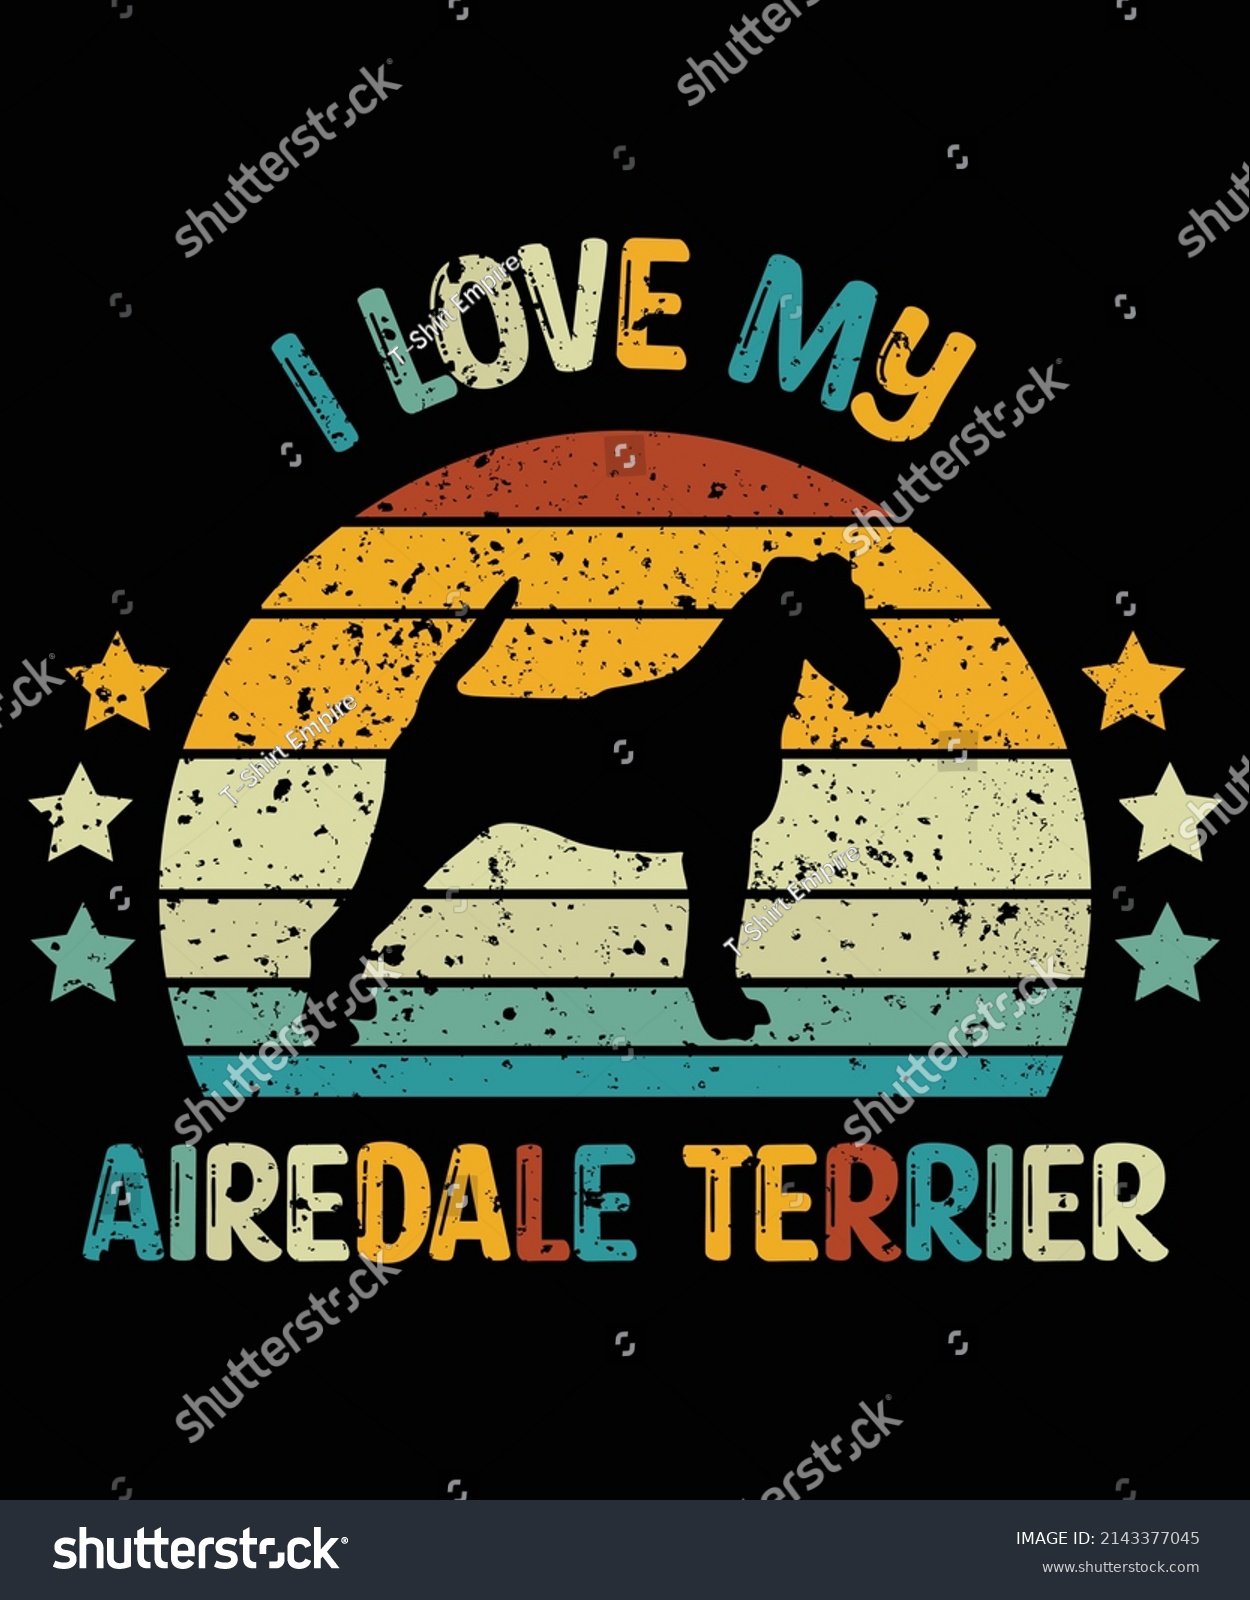 SVG of Airedale Terrier silhouette vintage and retro t-shirt design svg